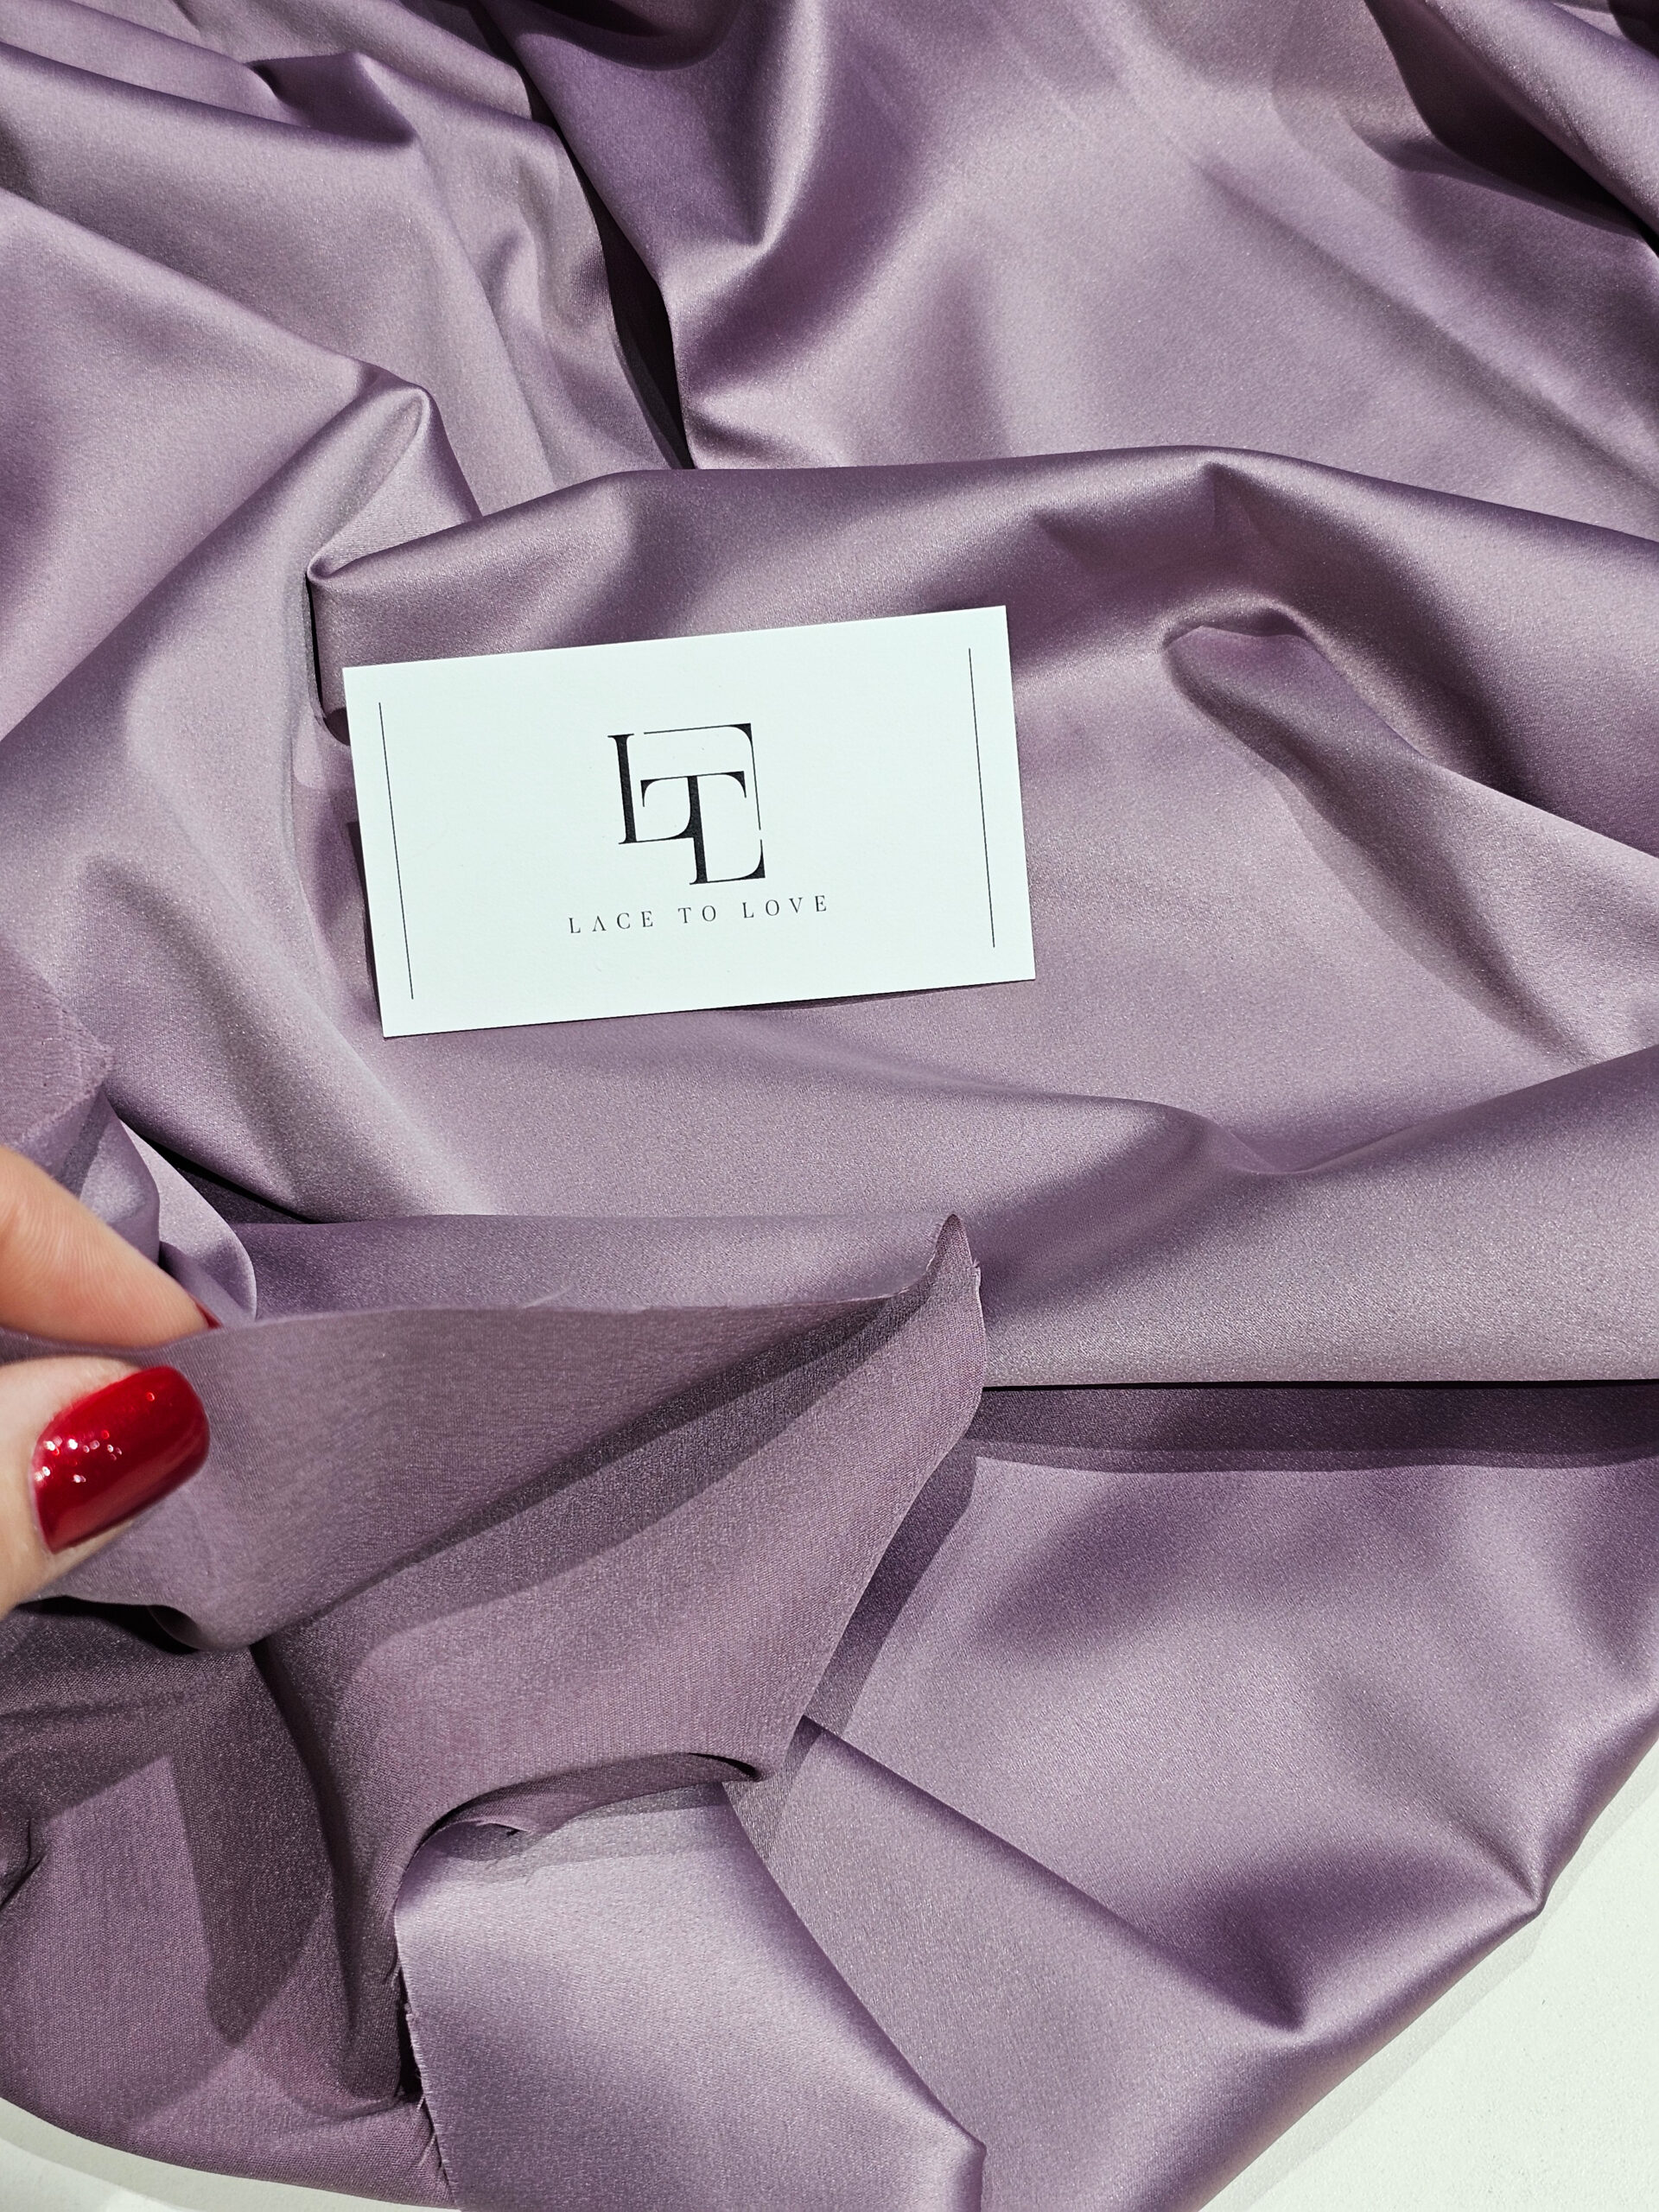 Purple satin fabric for dresses gowns